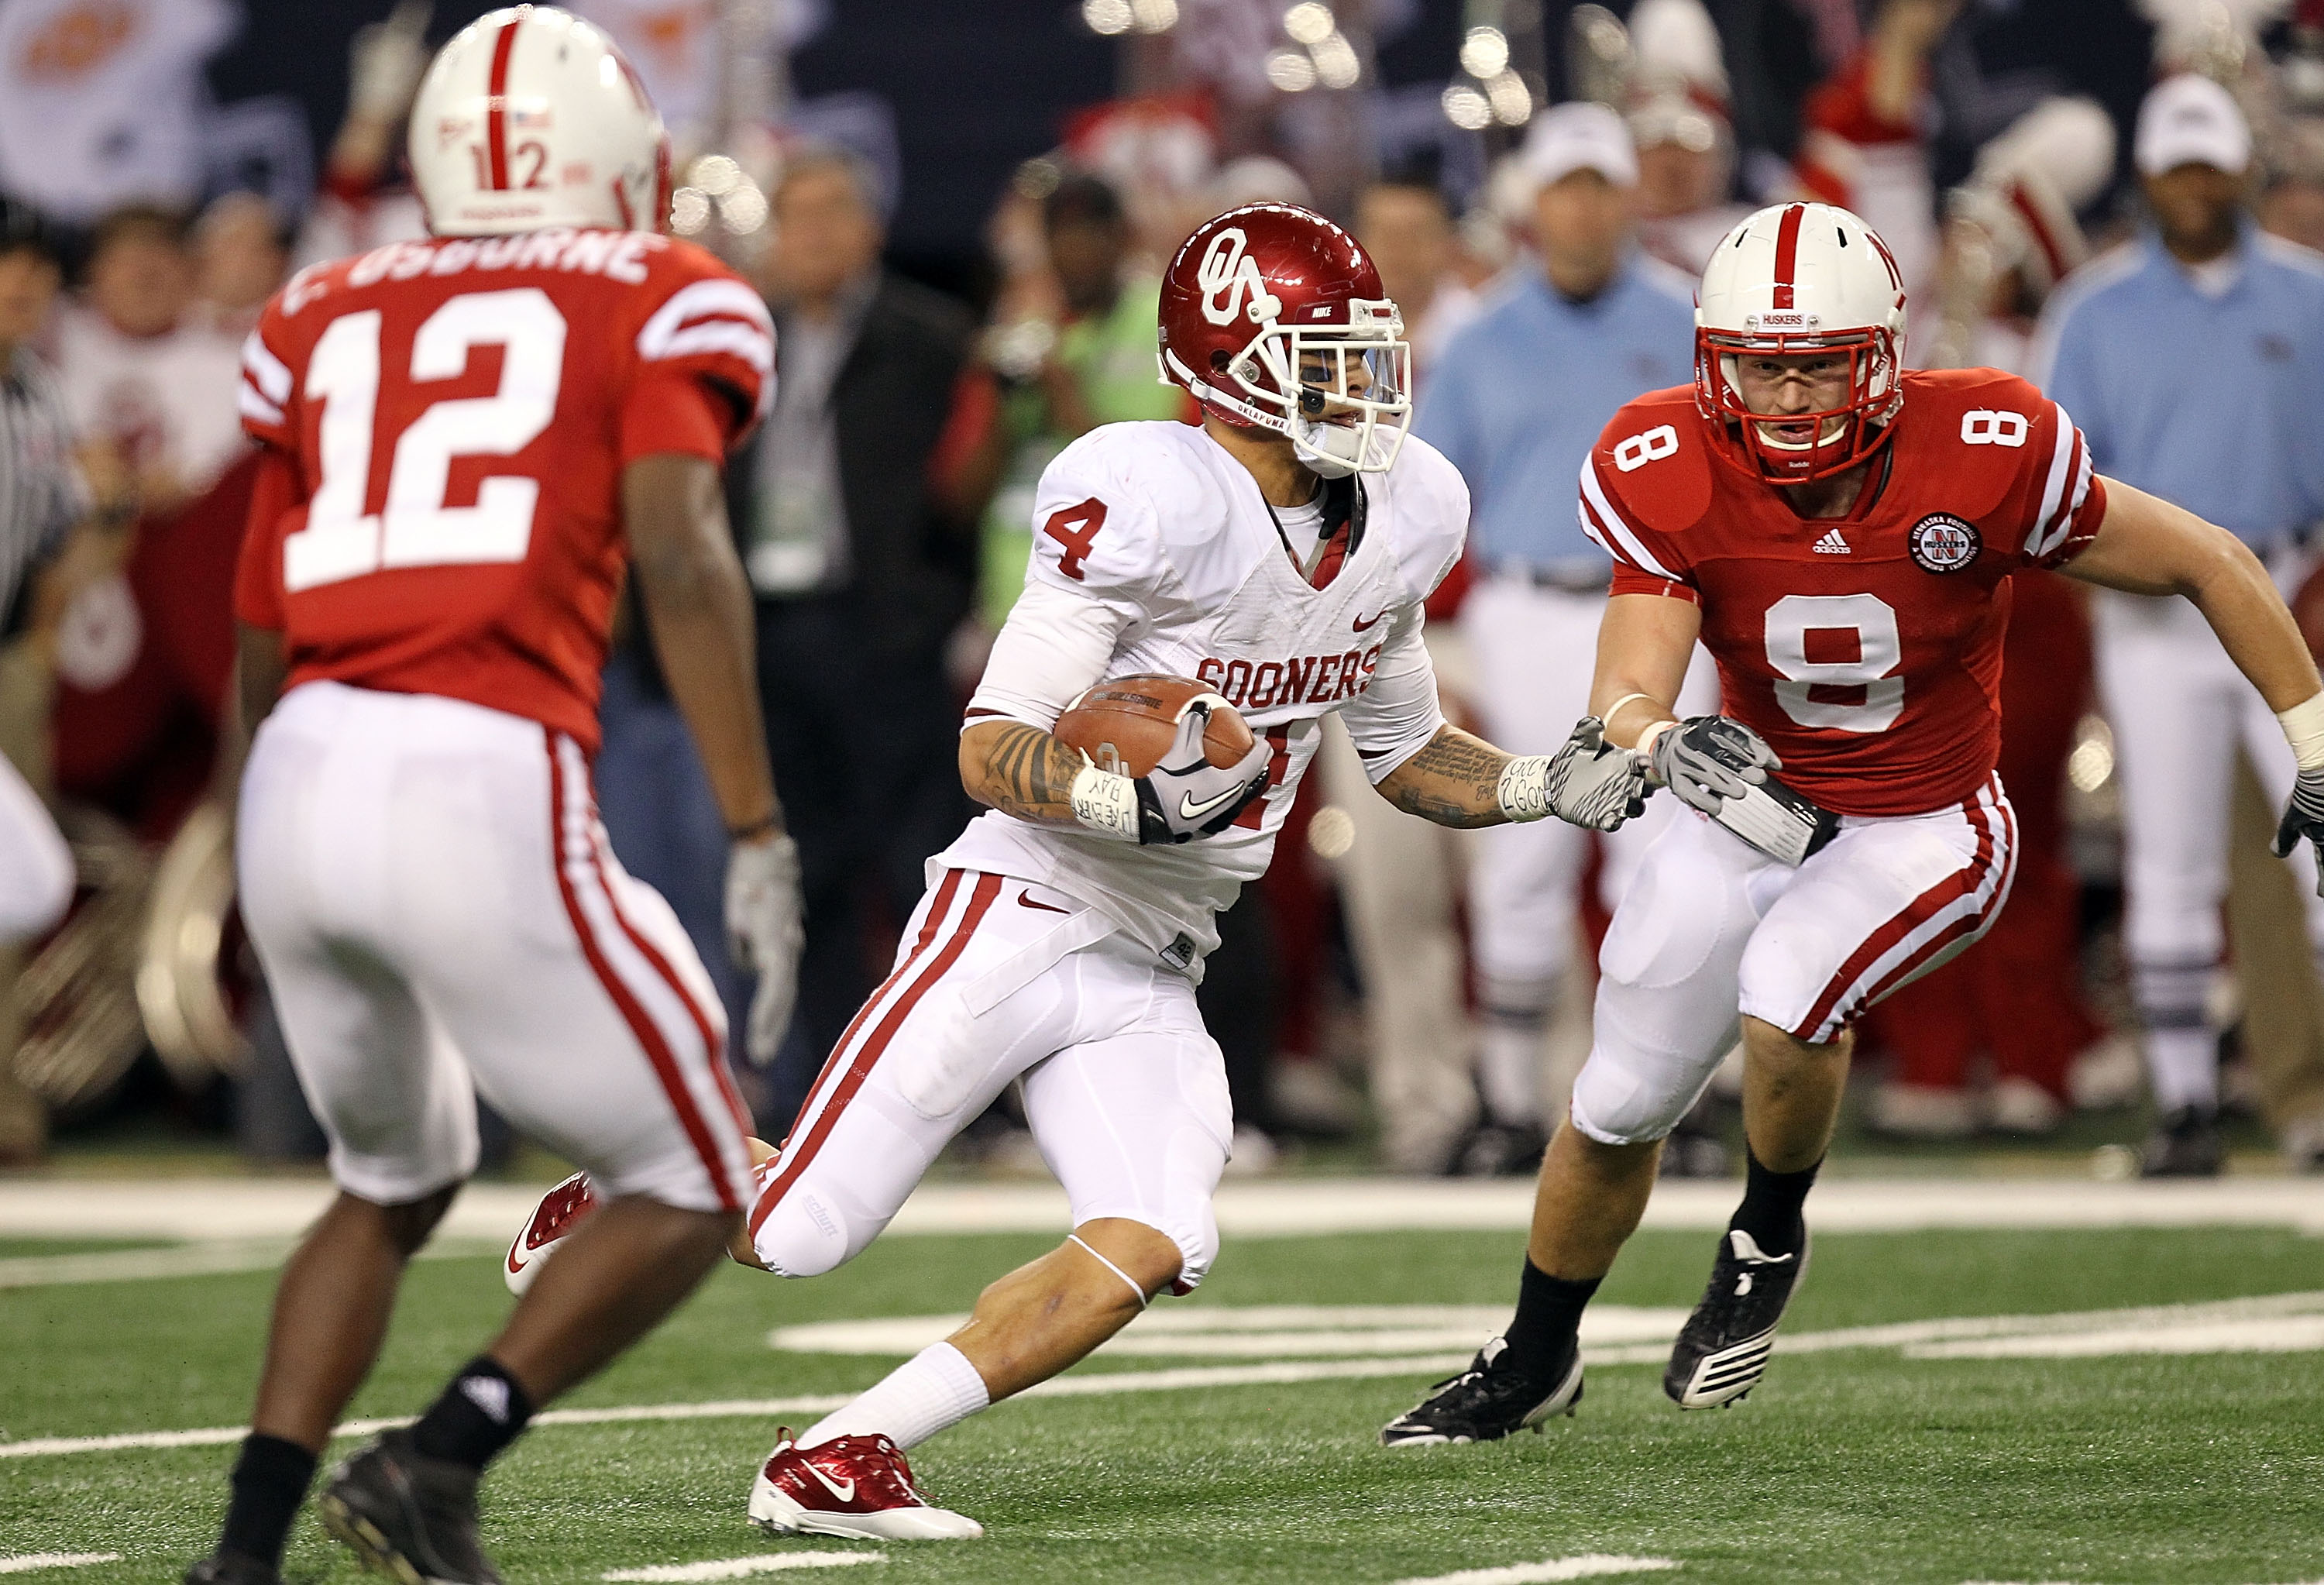 ARLINGTON, TX - DECEMBER 04:  Wide receiver Kenny Stills #4 of the Oklahoma Sooners runs the ball to the one yard line against the Nebraska Cornhuskers during the Big 12 Championship at Cowboys Stadium on December 4, 2010 in Arlington, Texas.  (Photo by R